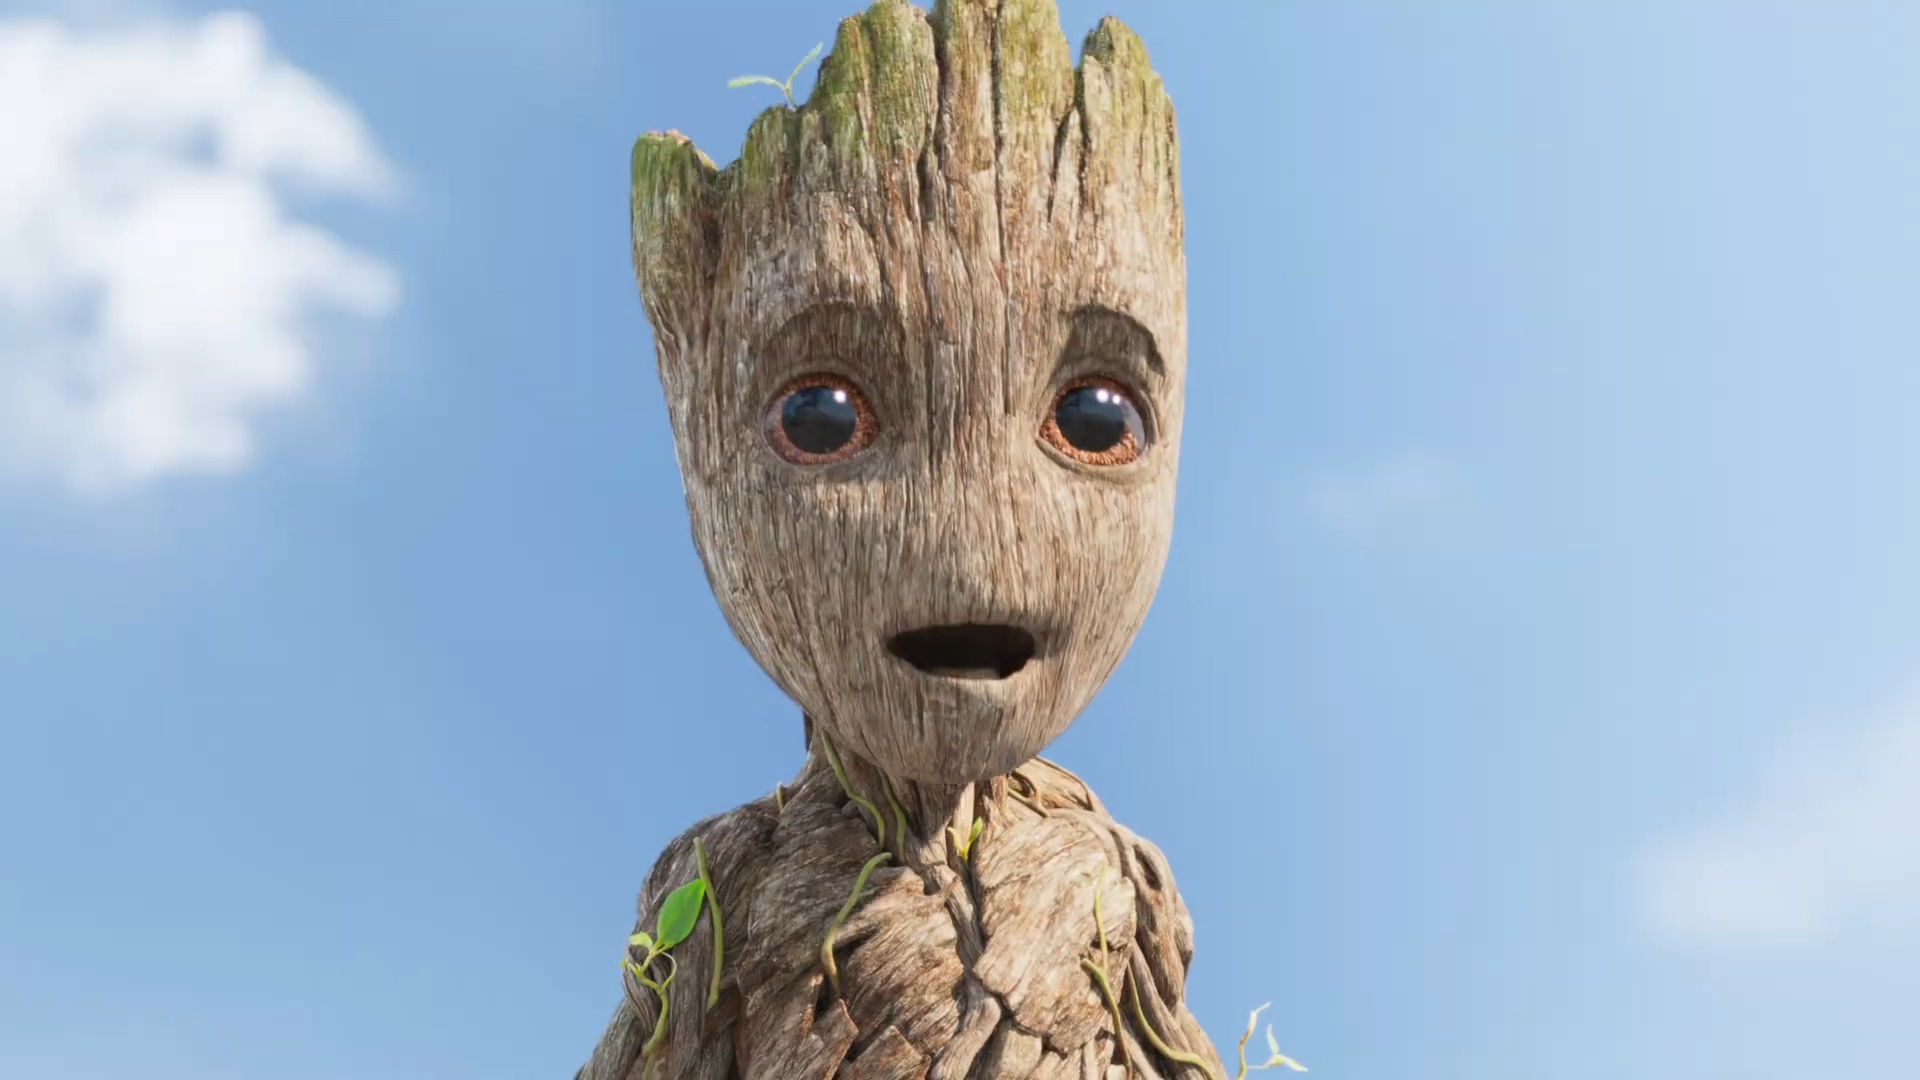 Upcoming “I am Groot” the series!